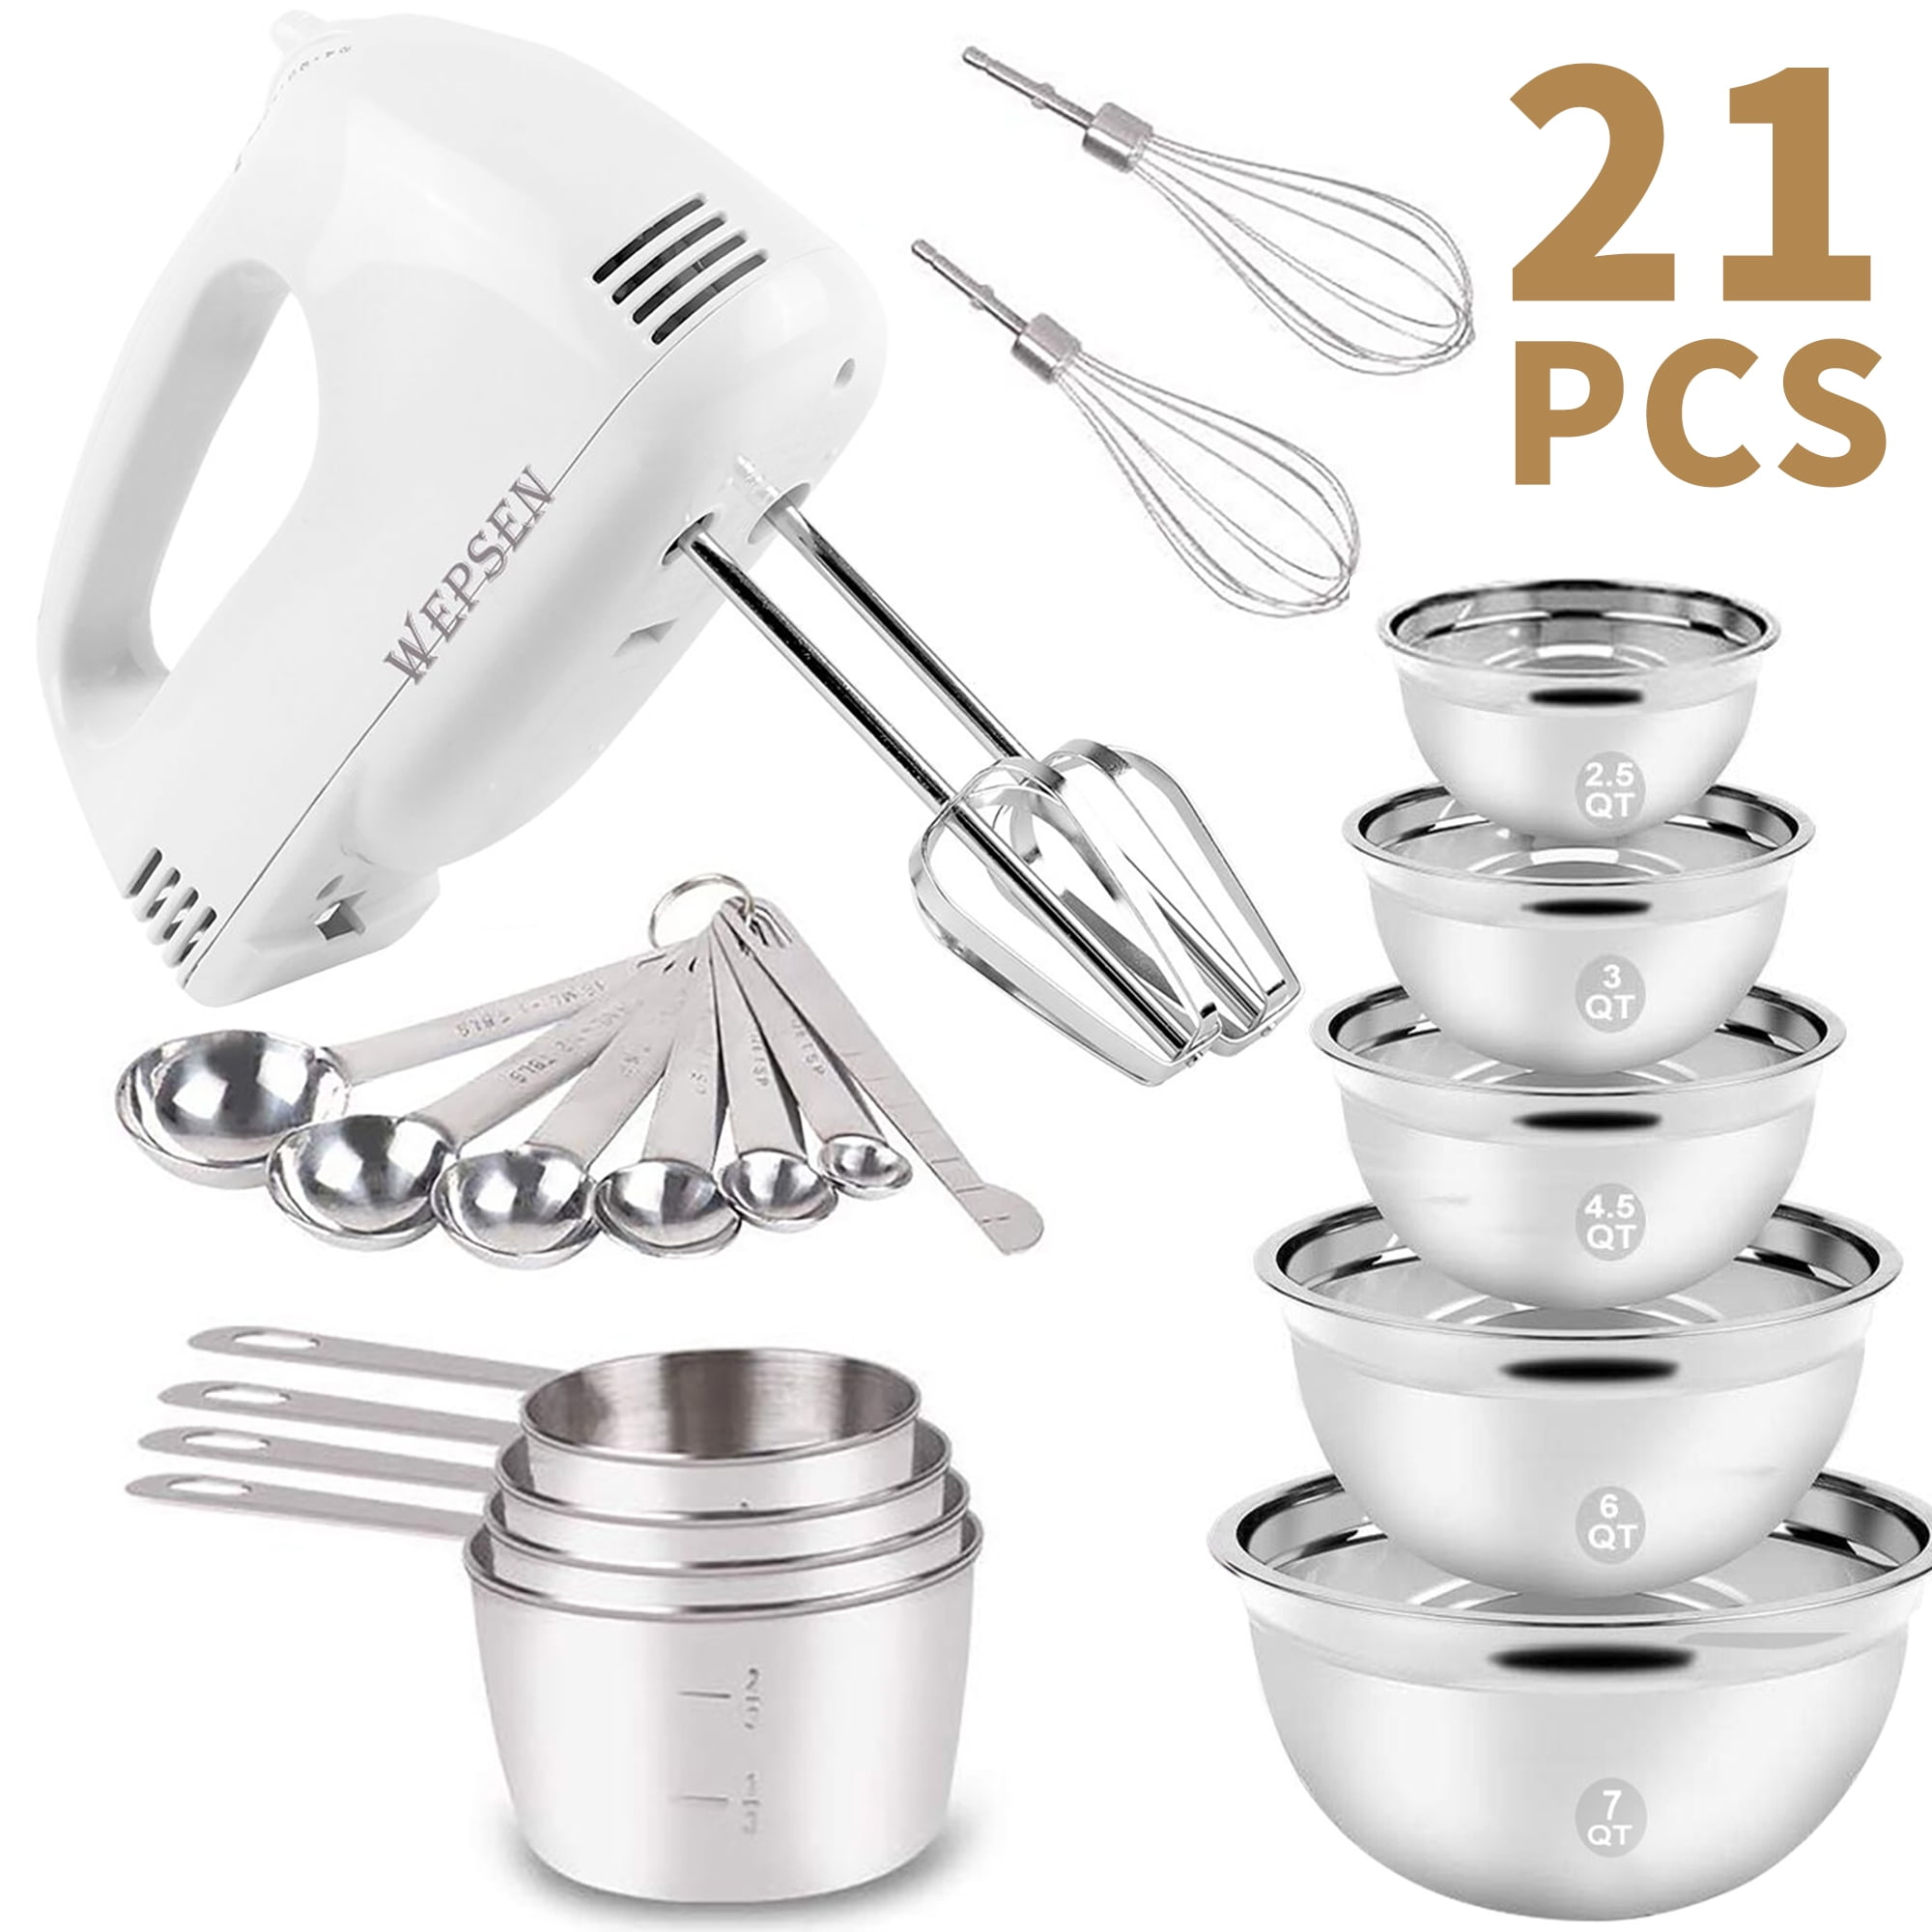 KOSBON Hand Mixer Mixing Bowls Upgrade 5-Speeds Mixers with Silver Nesting Stainless Steel Bowl, Measuring Cups and Spoons Whisk Blender - Baking for Cooking - Walmart.com